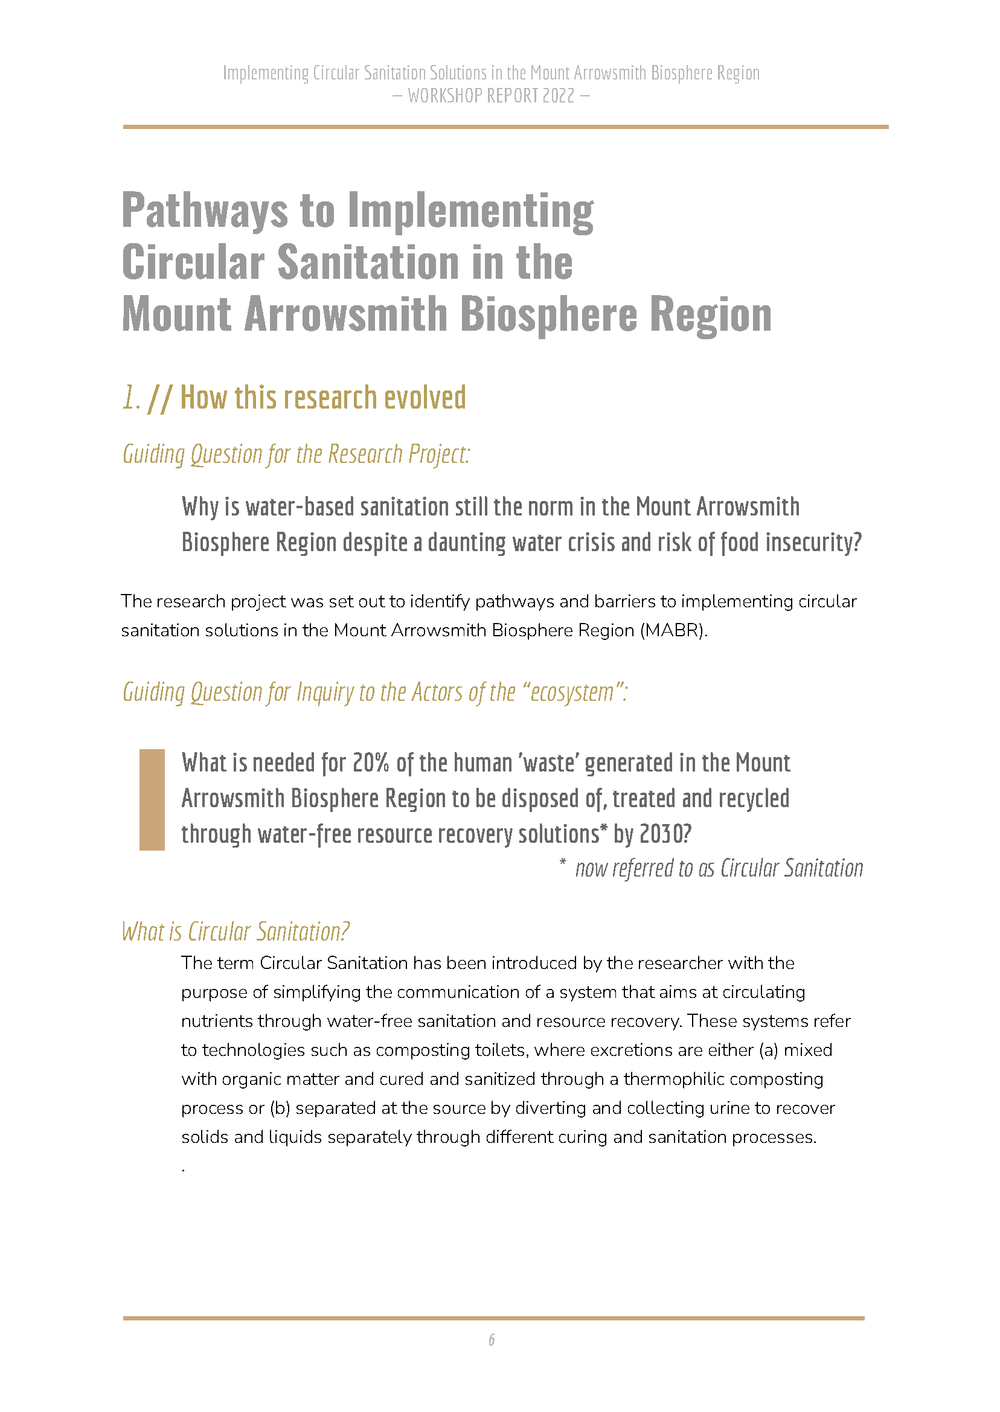 Circular Sanitation in the MABR - Evaluation Workshop Report – September 2022[FINAL]_02_Seite_06.png